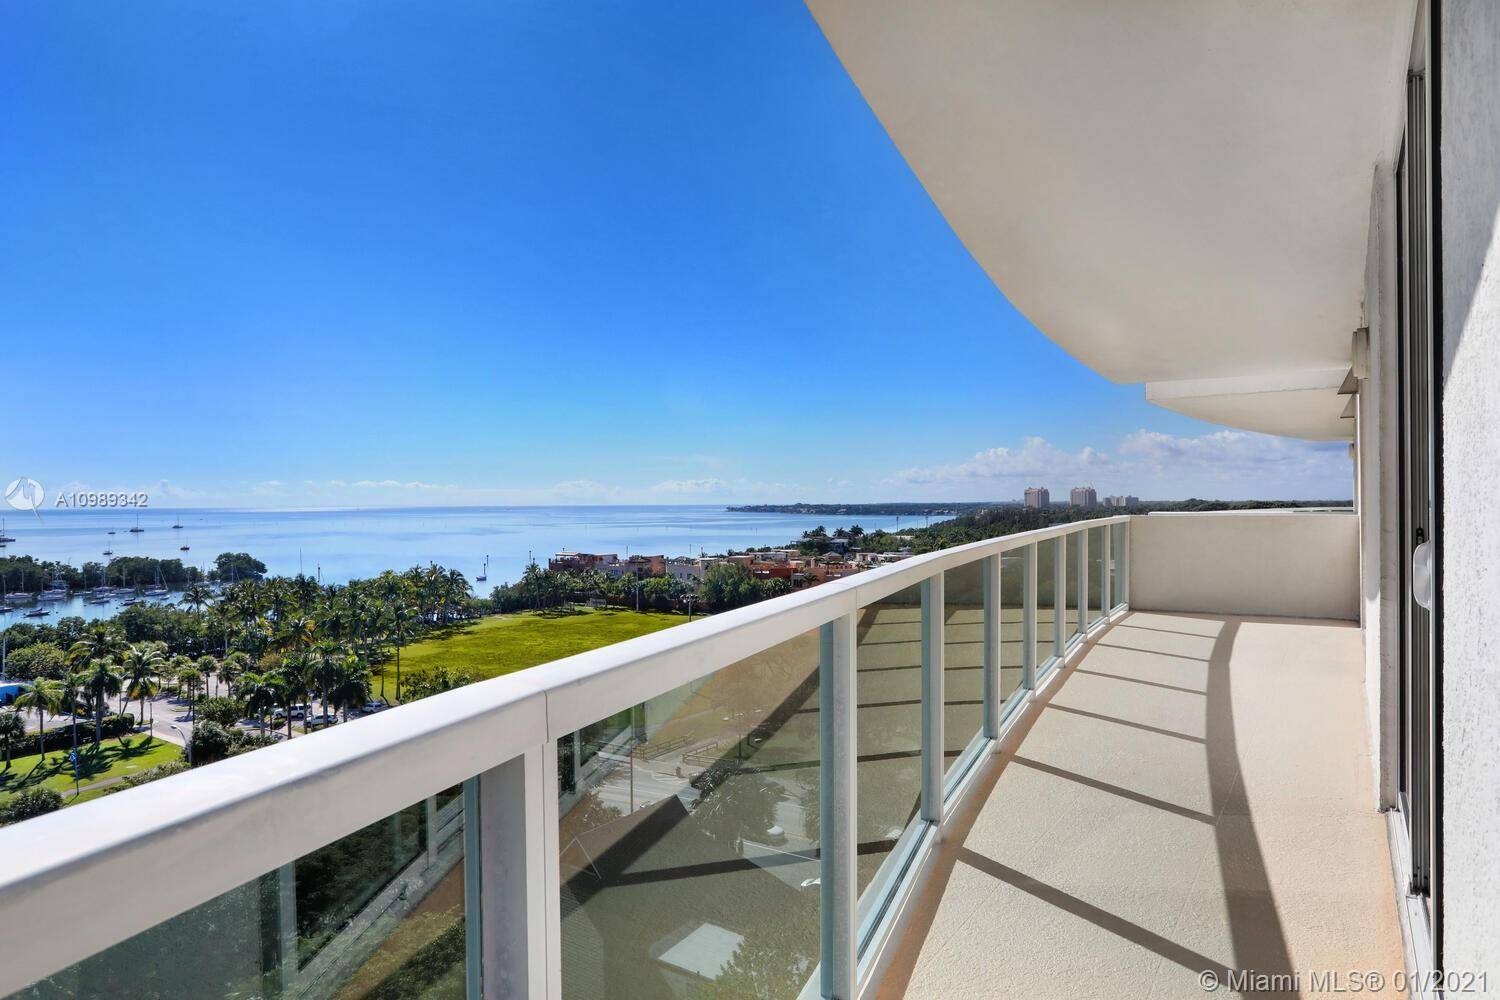 Enjoy spectacular views of Biscayne Bay from this light filled residence in the heart of the Coconut Grove village.